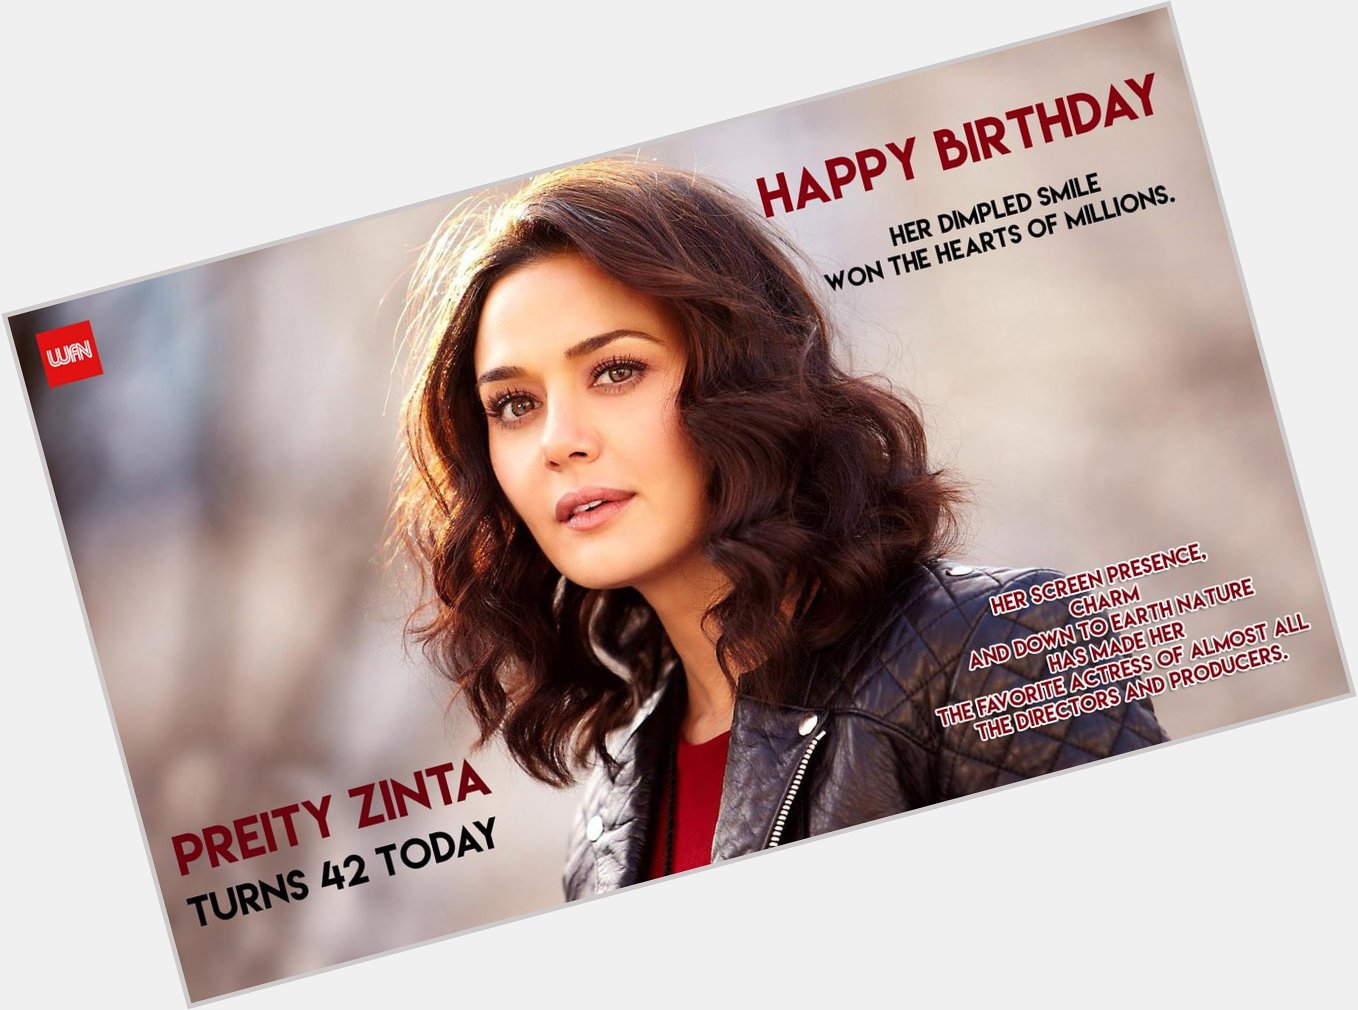 Wishing a very Happy Birthday to the dimple girl of Bollywood Preity Zinta. 